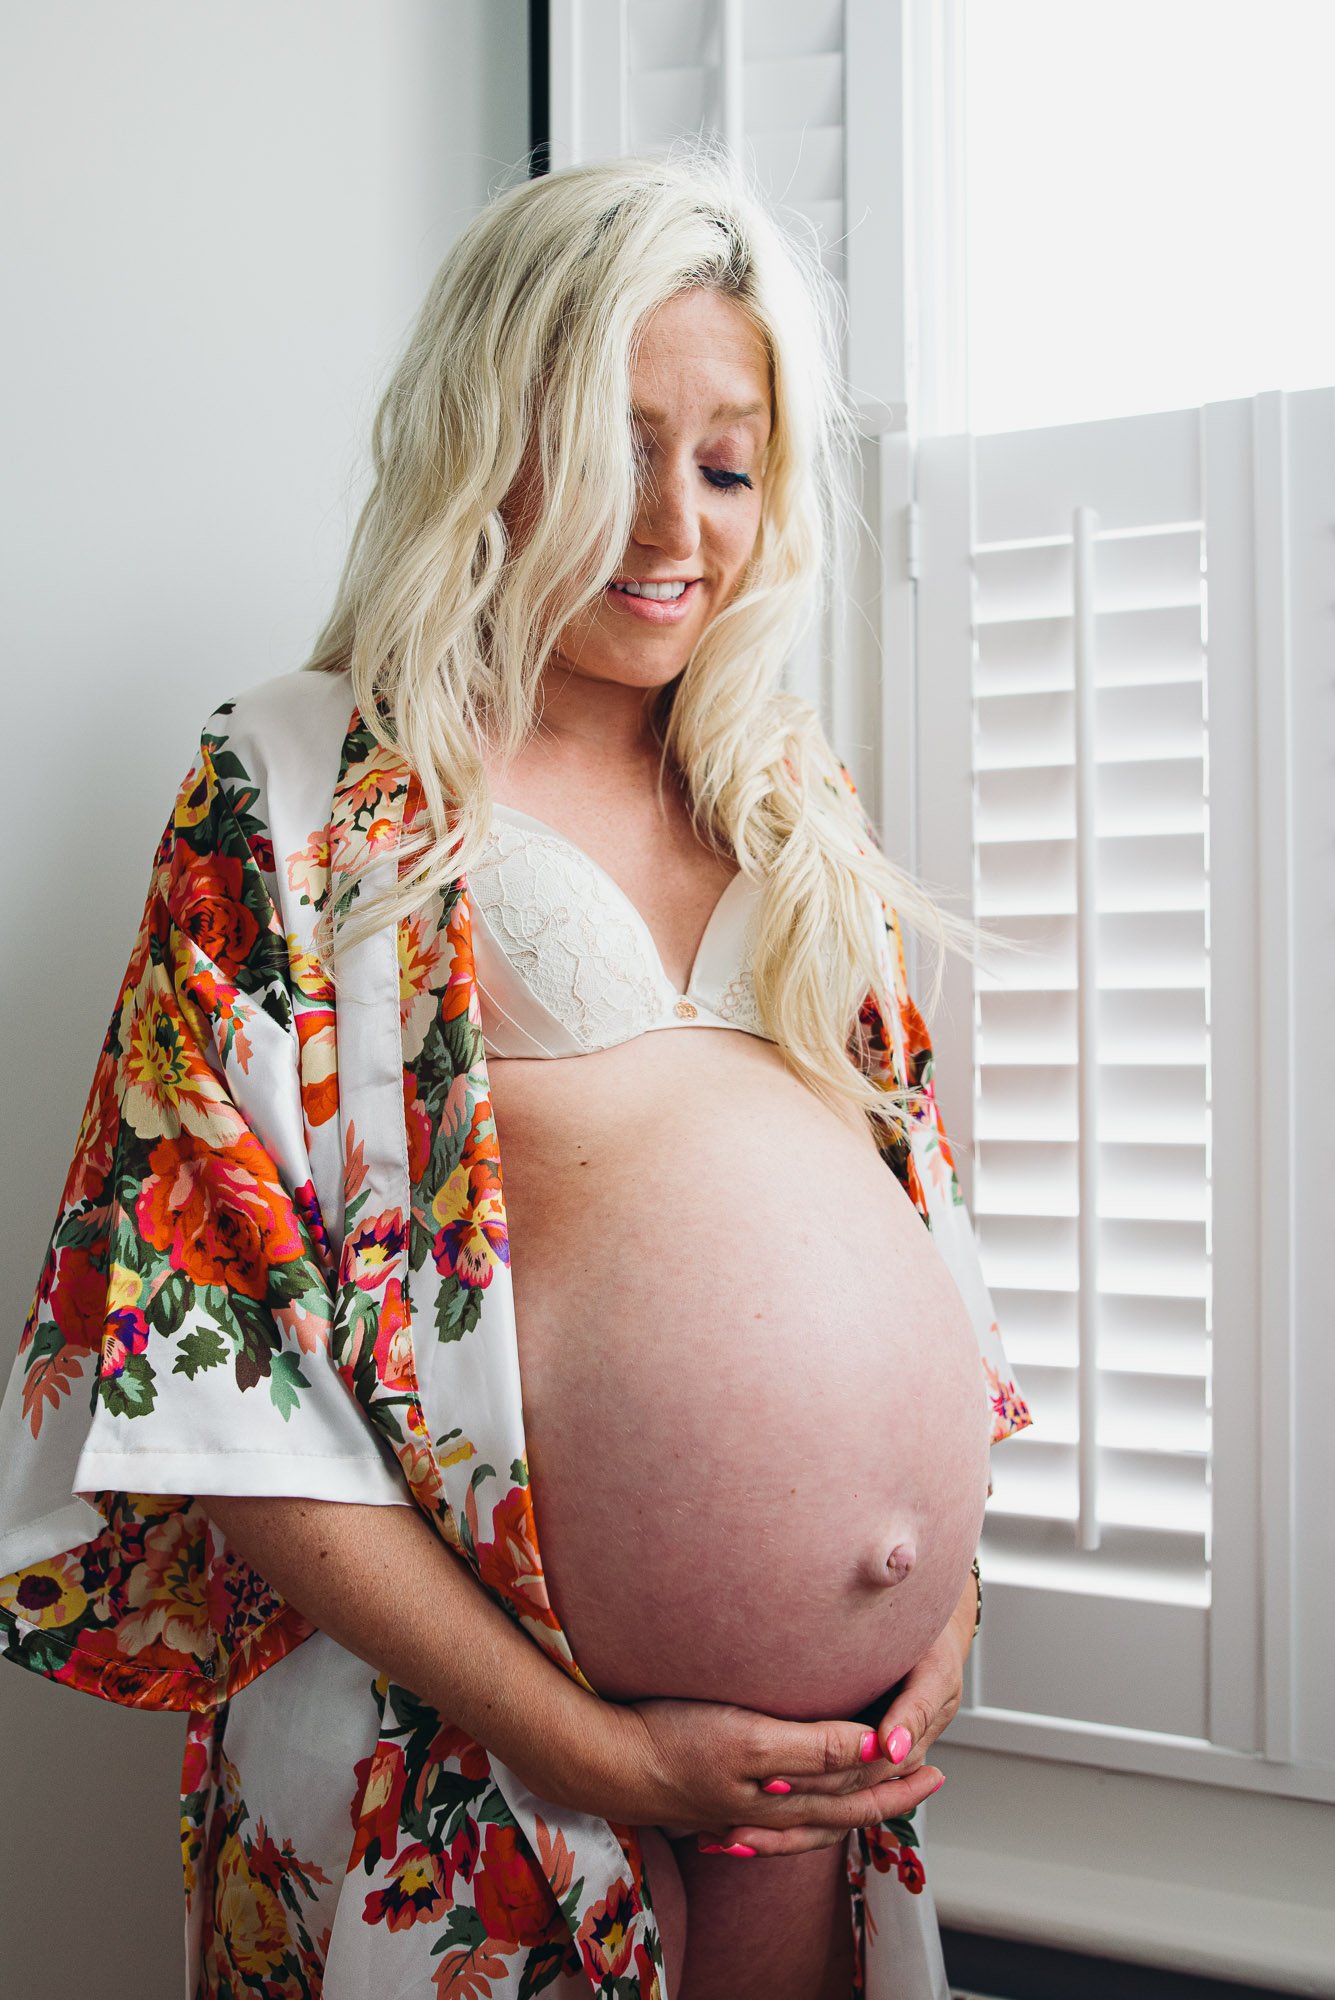 at-home-maternity-photographer-brighton-hove-sussex-worthing-lewes-woman-bedroom-window-pregnant-belly.jpg